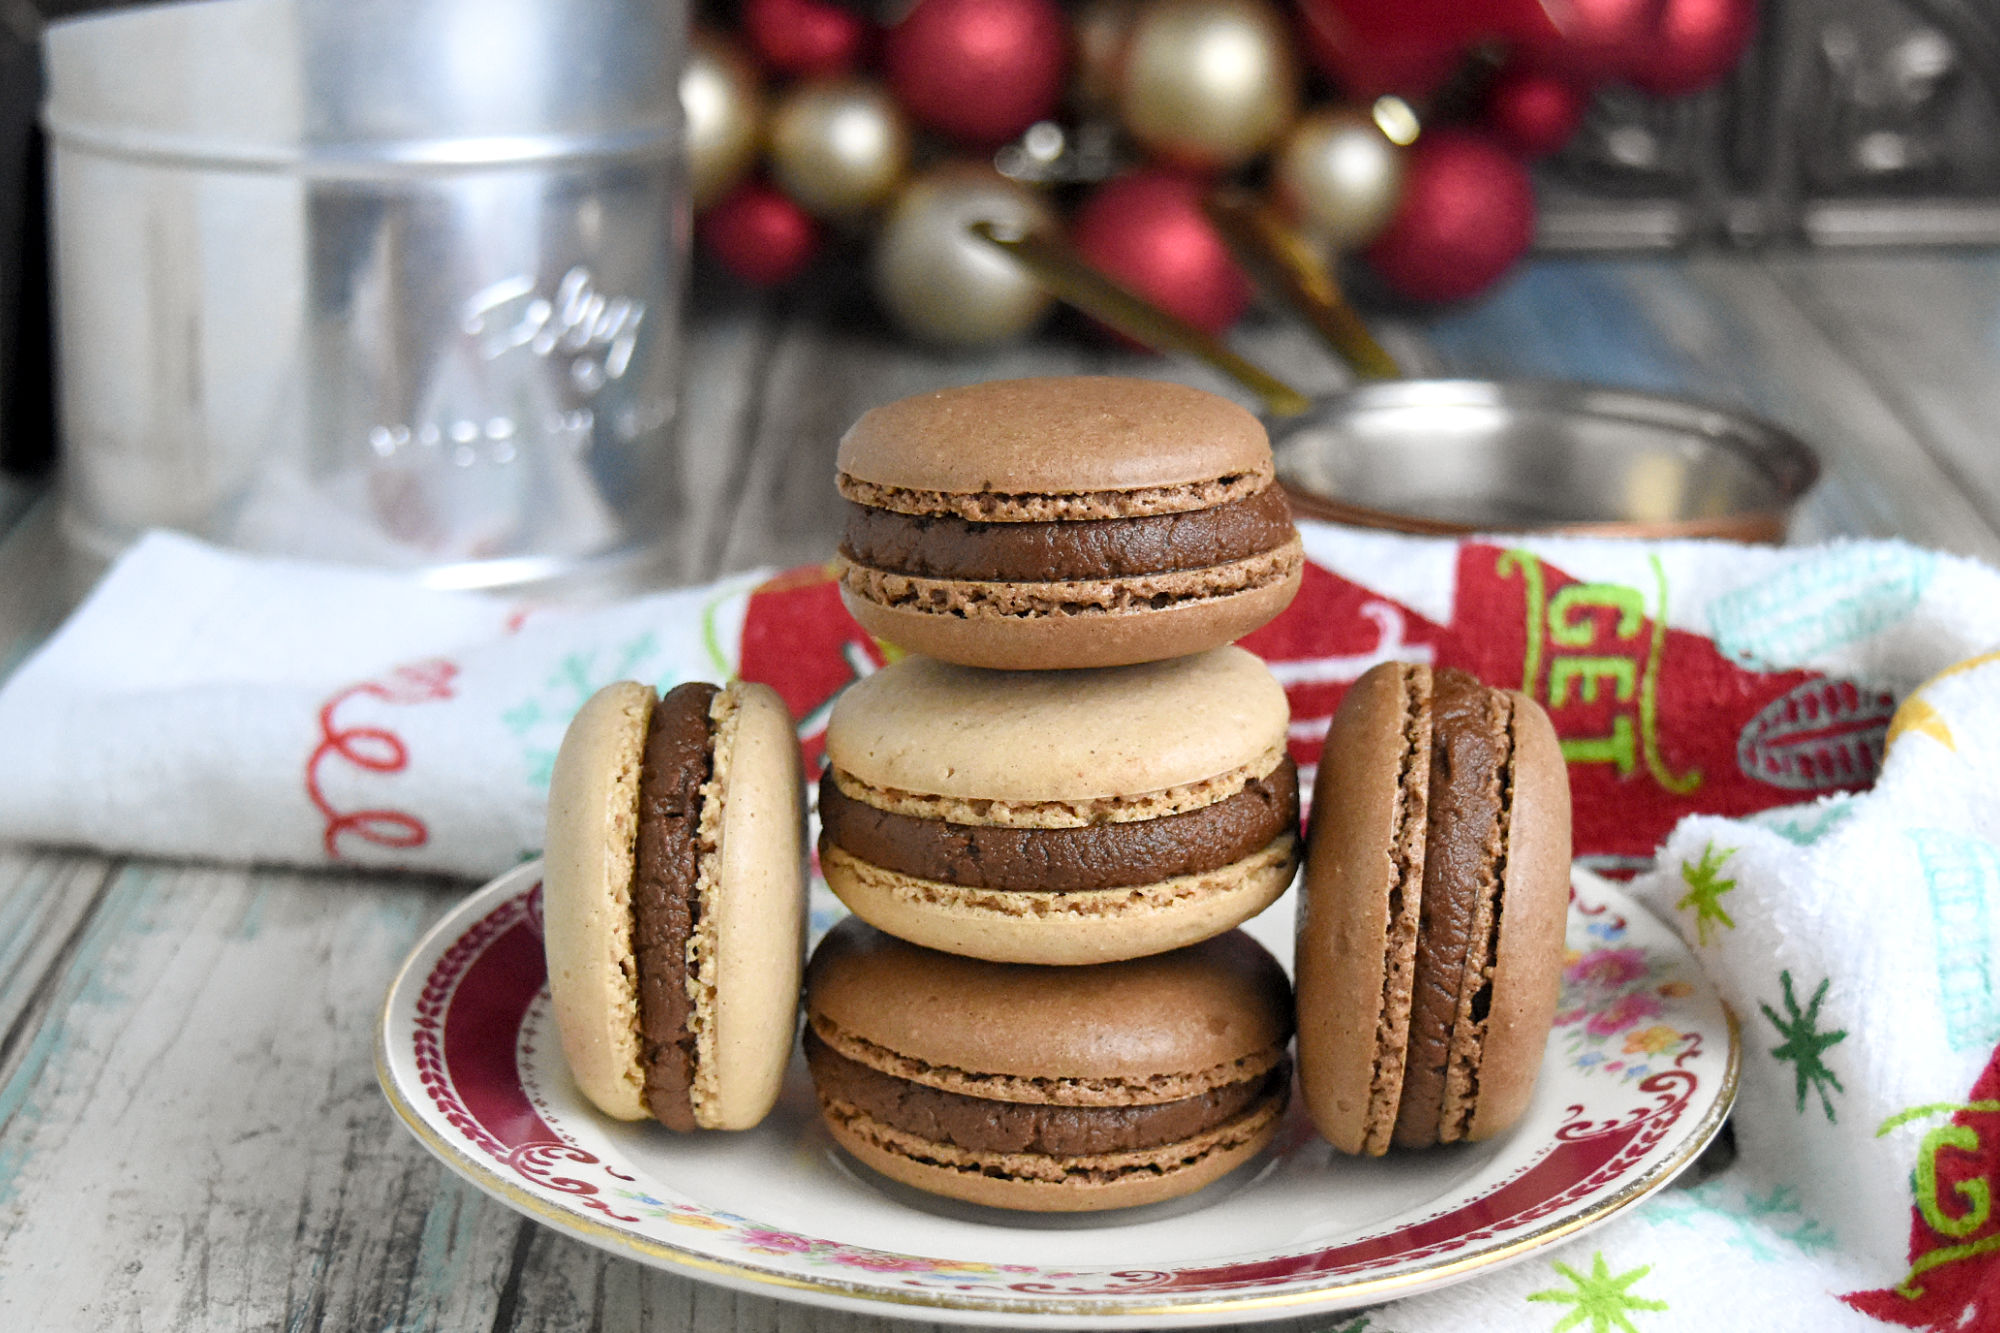 Reese’s Macaron have cocoa powder and peanut butter powder in the shells for delicious chocolate peanut butter flavor. And there’s peanut butter and cocoa powder in the filling, too. #ChristmasCookies #macaron #peanutbutter #chocolate #reesescups #Pbandchocolate 